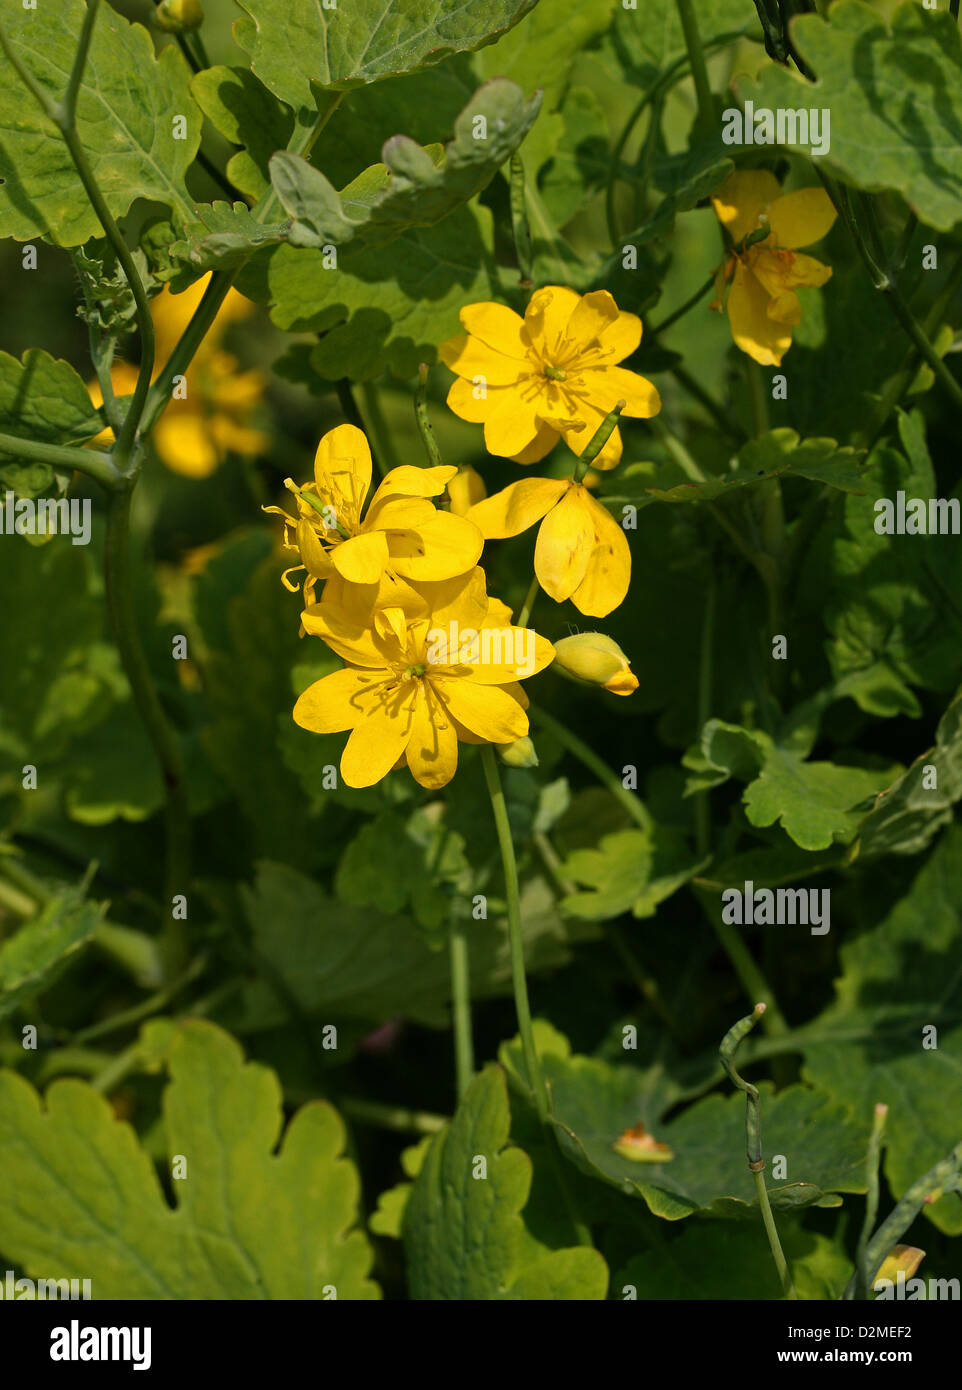 Double Flowered Greater Celendine, Chelidonium majus 'Flore Pleno', Papaveraceae. A cultivated variety with double flowers. Stock Photo